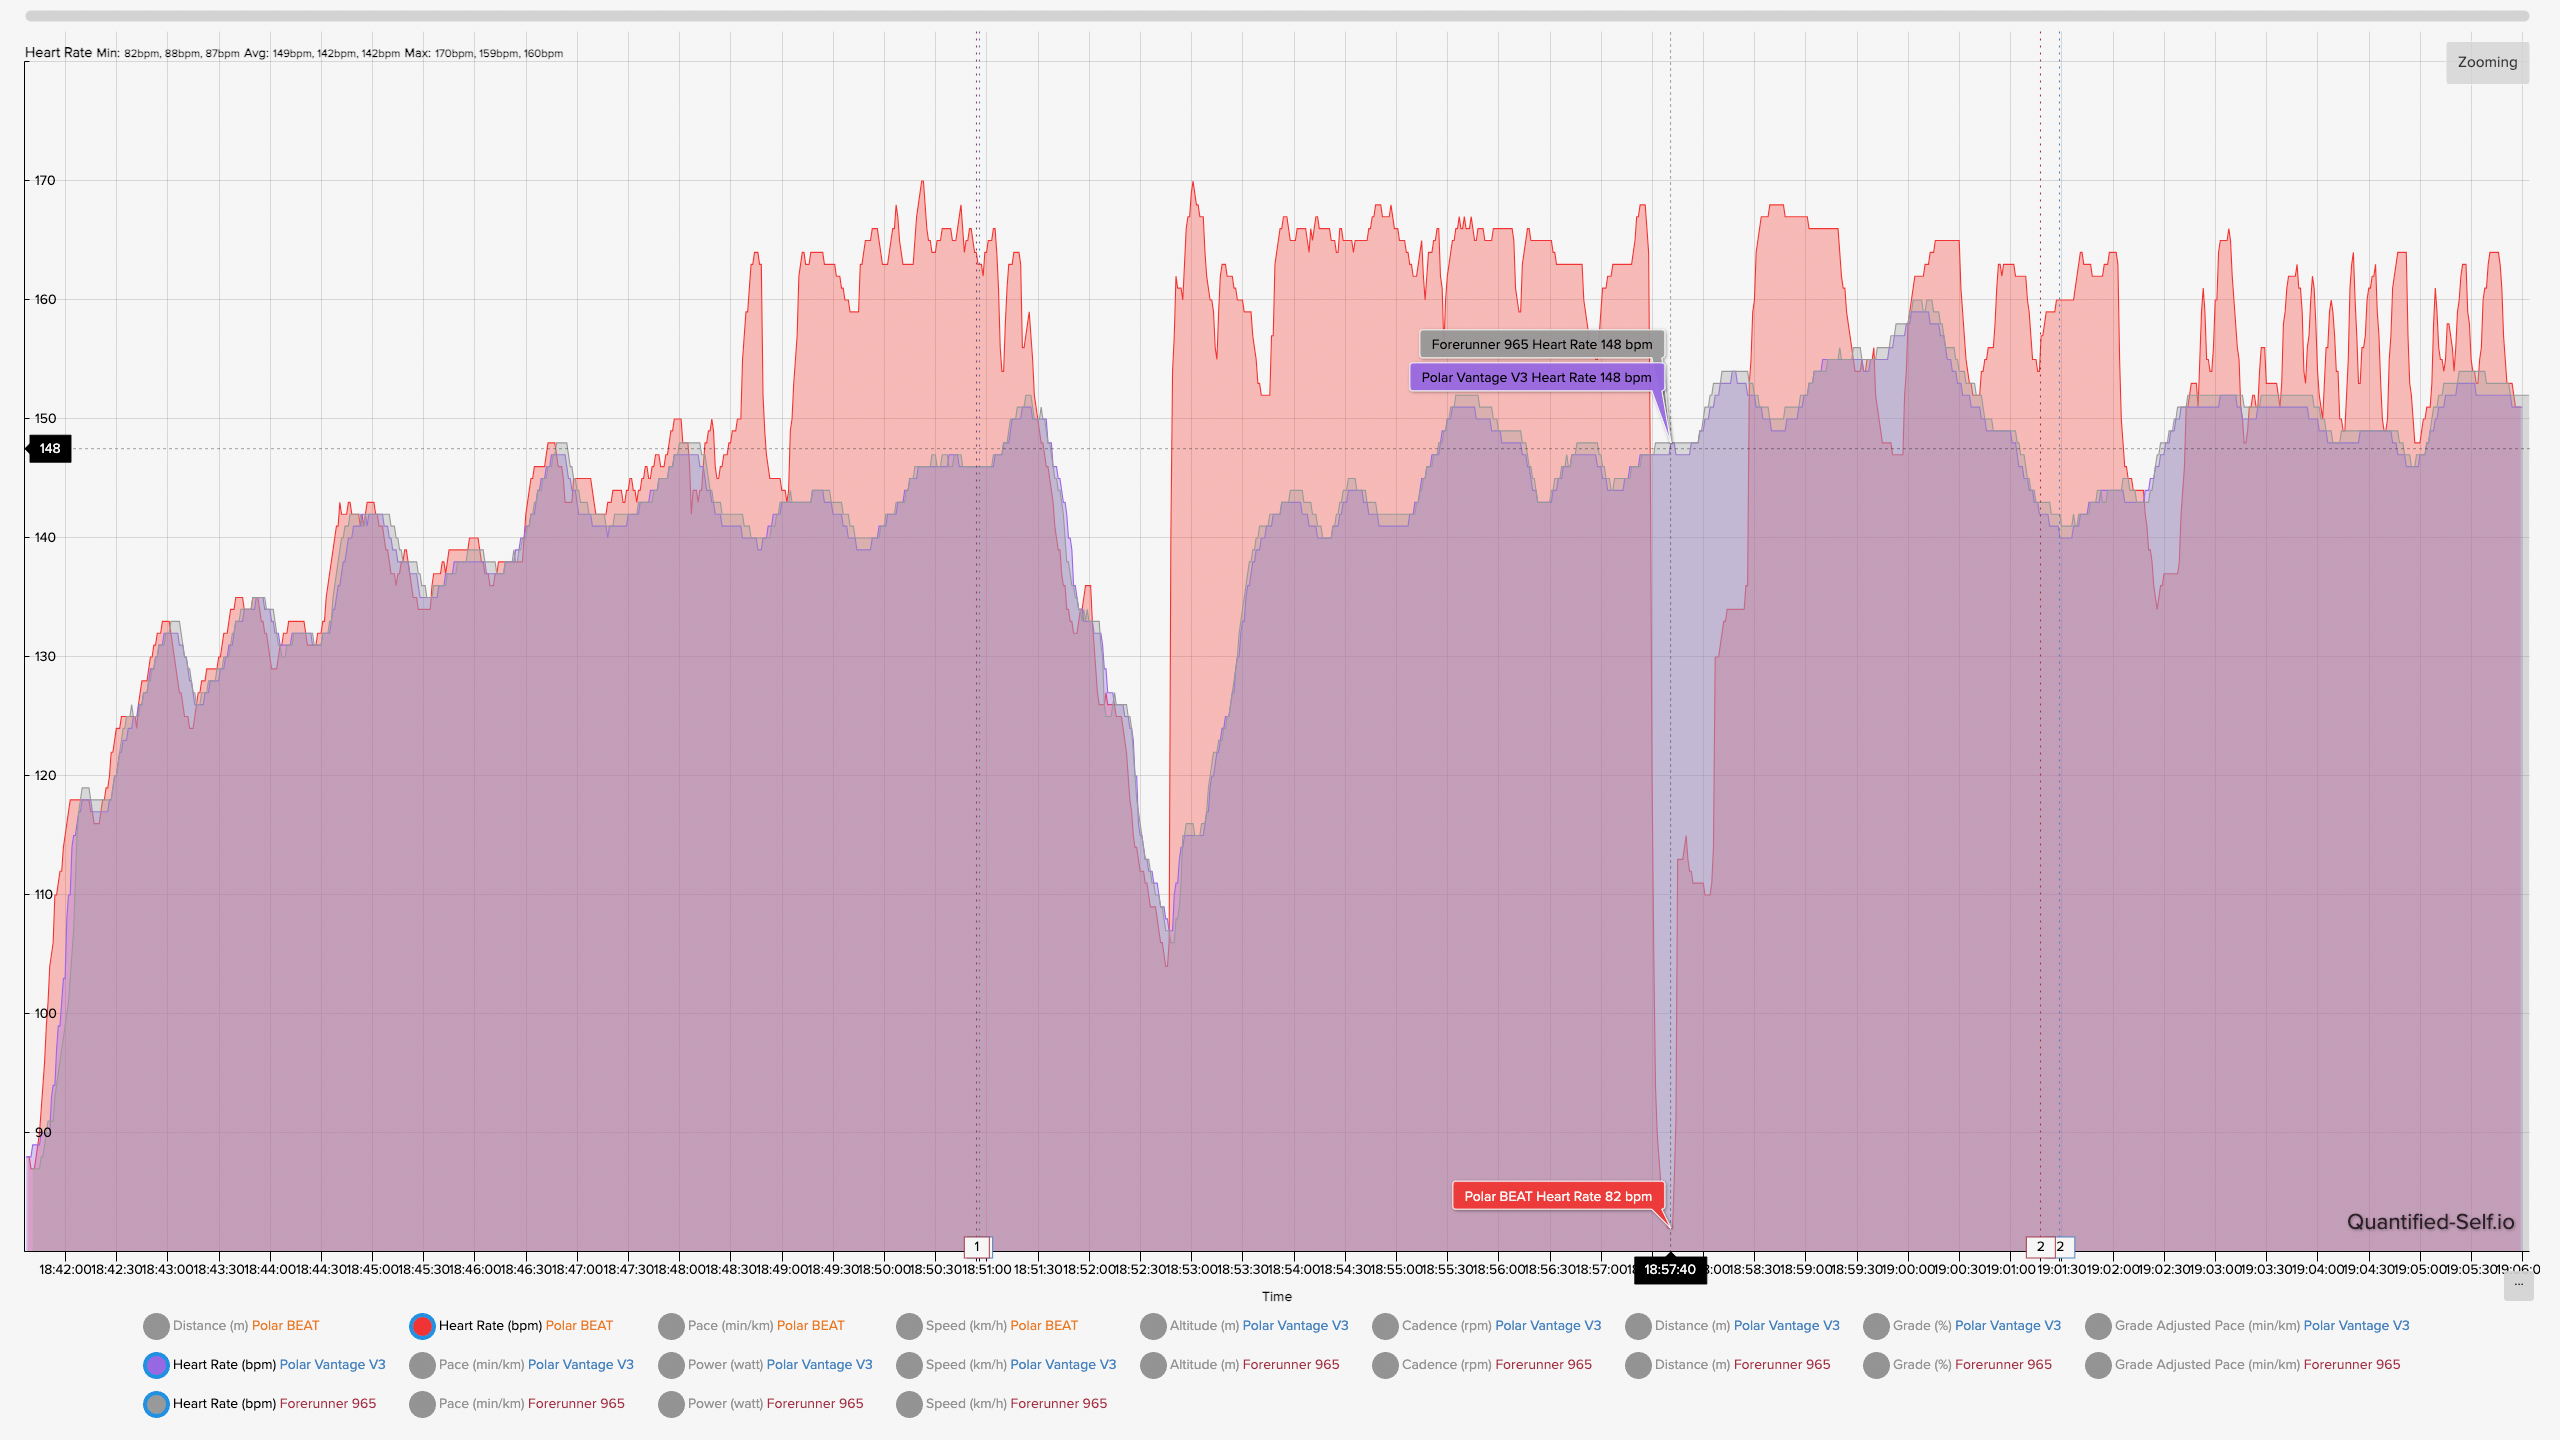 A heart rate chart showing how the Polar Vantage V3, Garmin Forerunner 965, and Polar H10 compare.